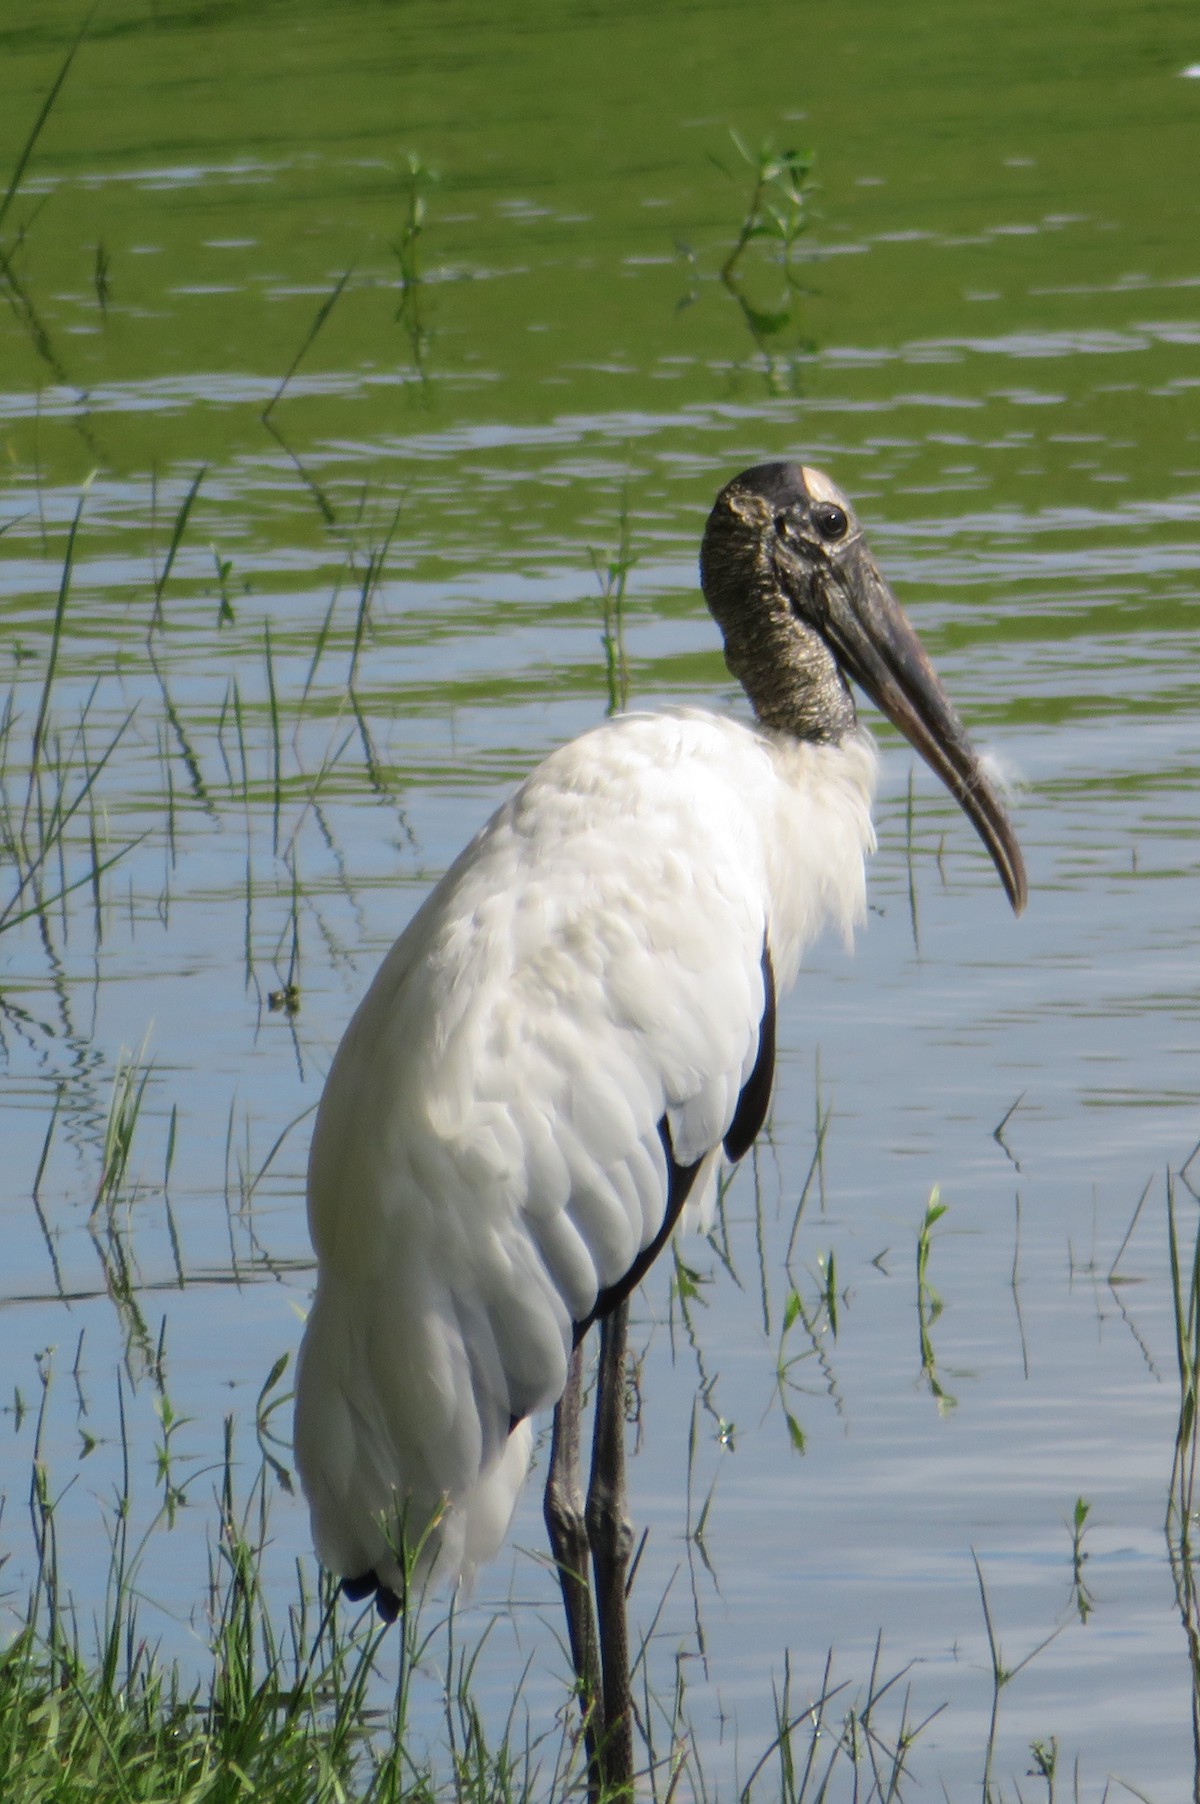 Wading Wood Stork In The Villages